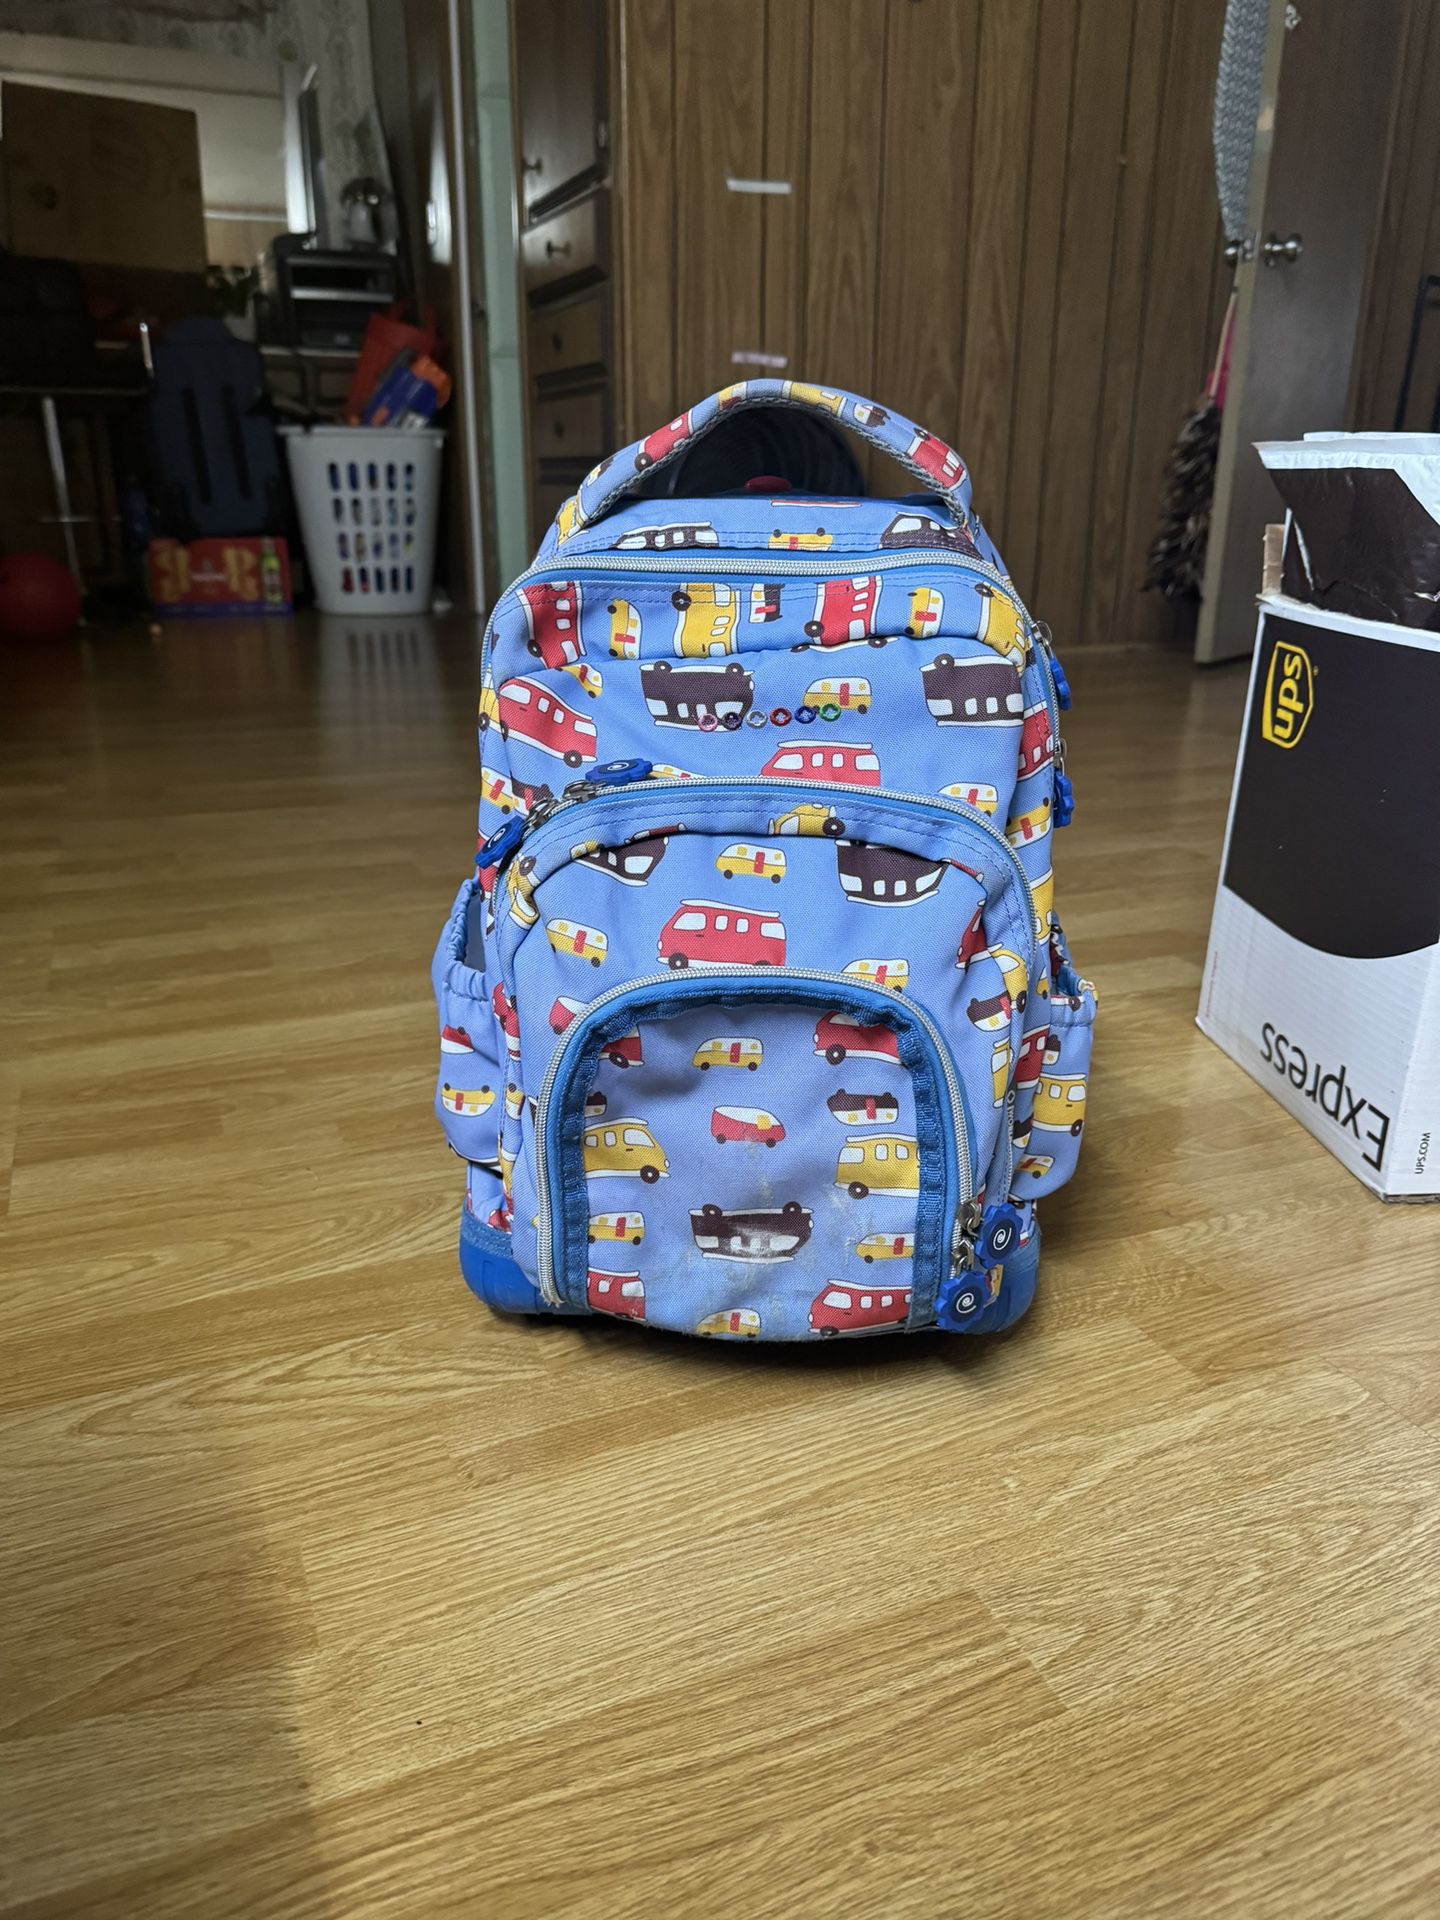 Rolling Backpack For Boys $8 18 Inches